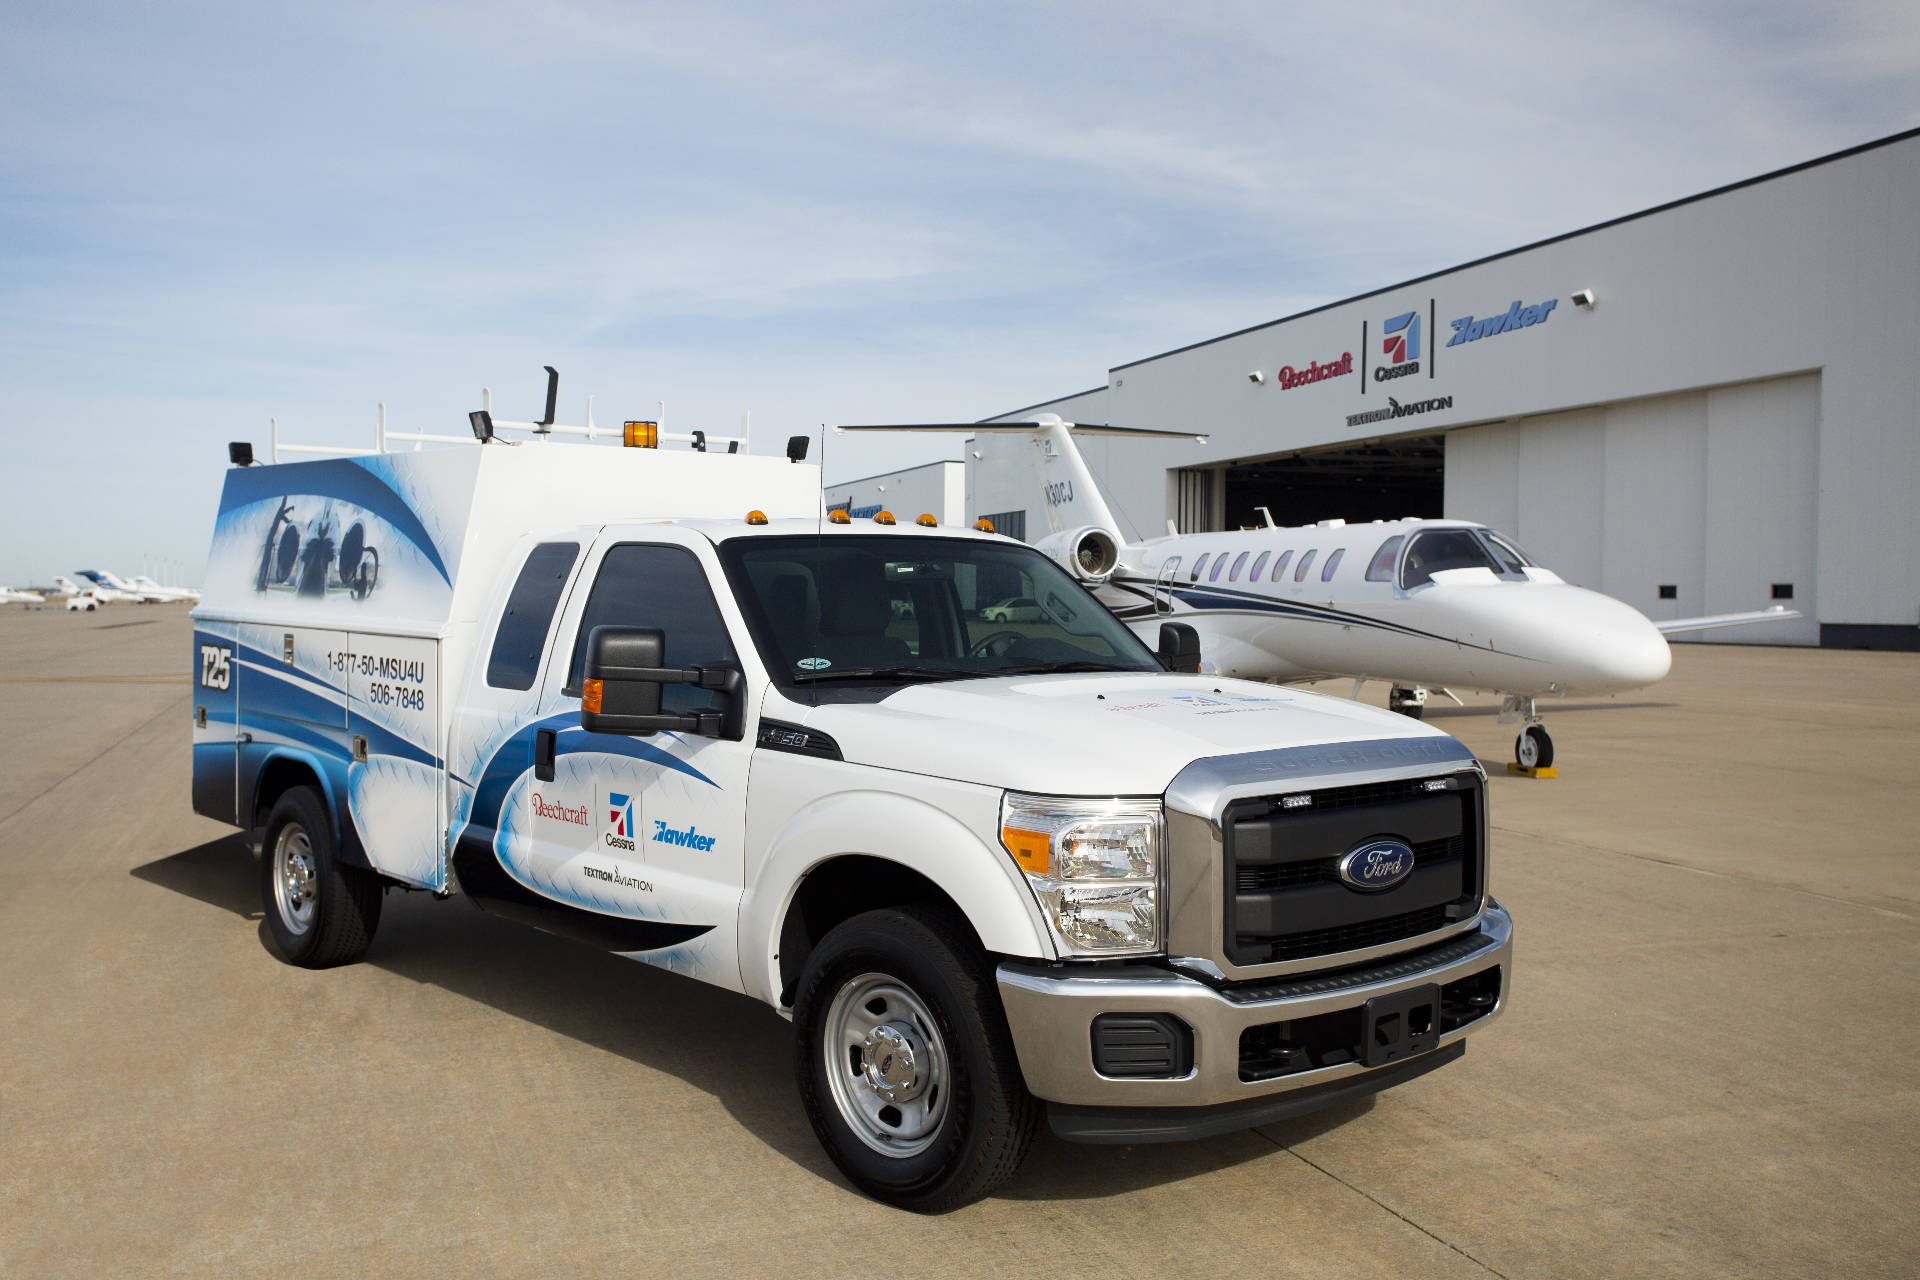 Mobile Service truck supporting aircraft